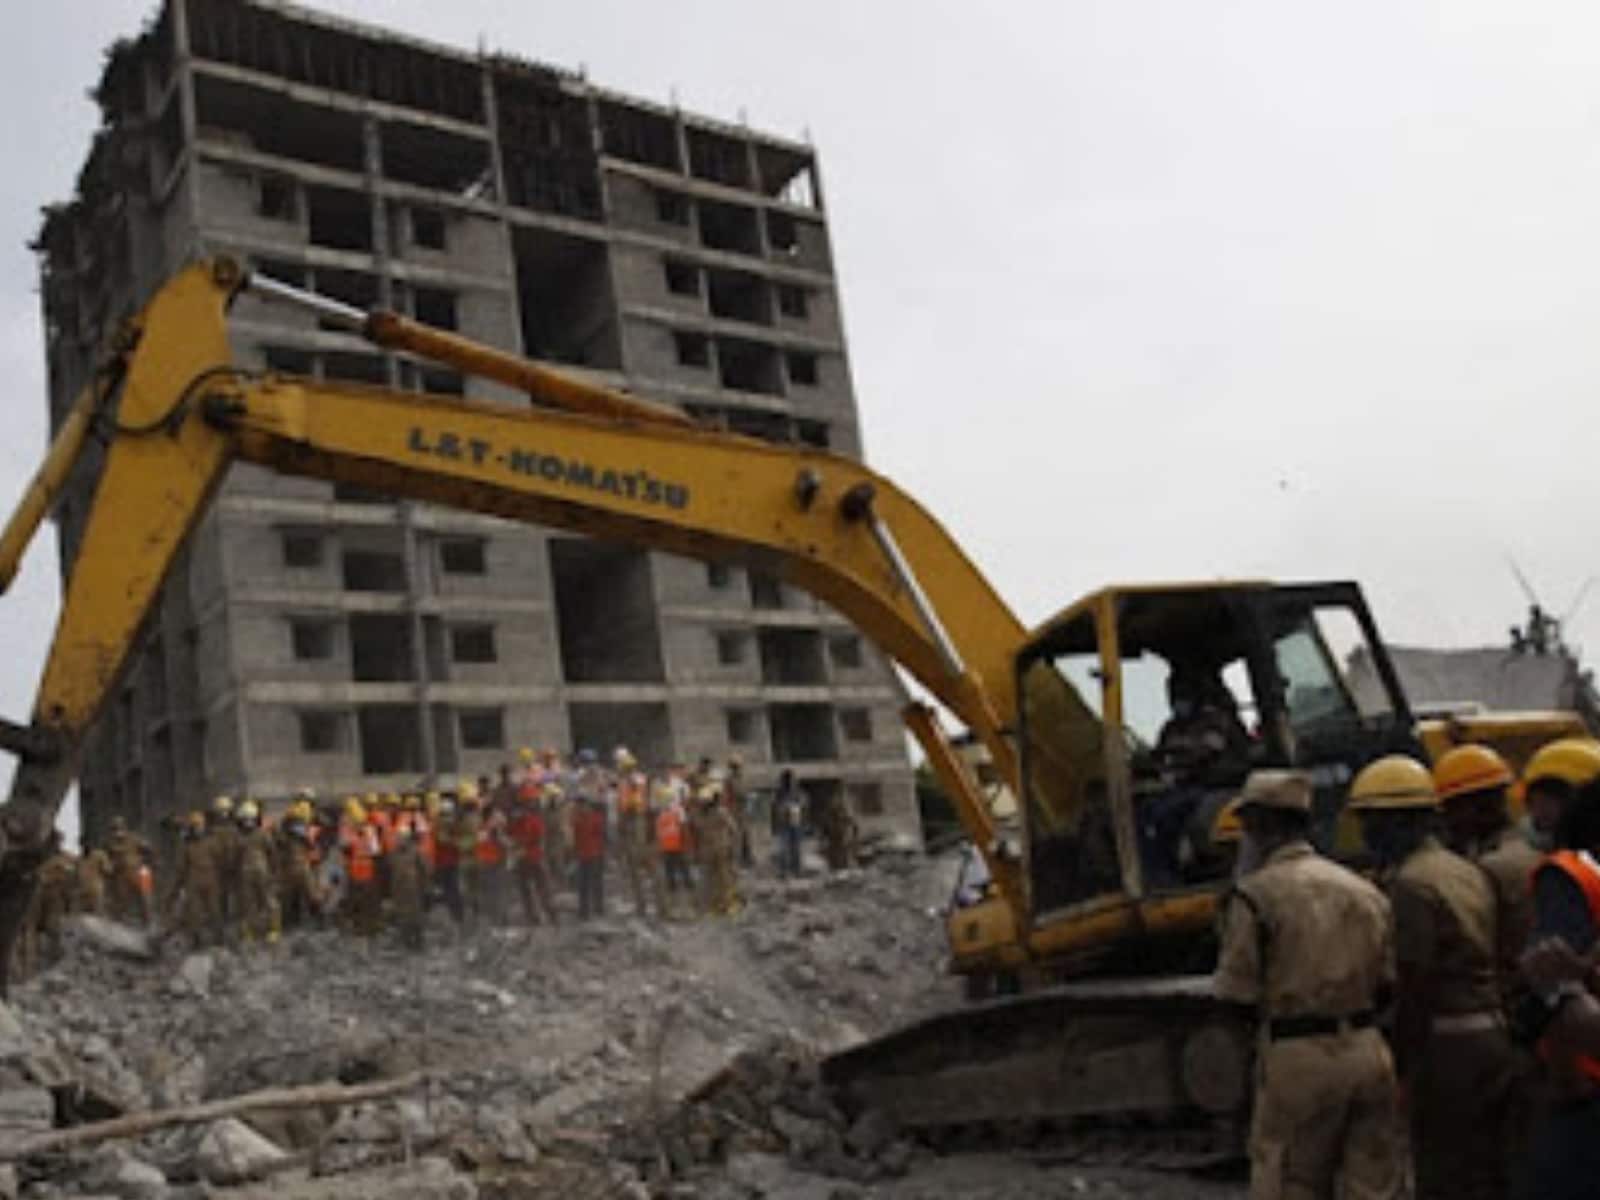 Noida Twin Towers Demolition: Illegal, Unsafe Buildings Razed Using Explosives in Past Too